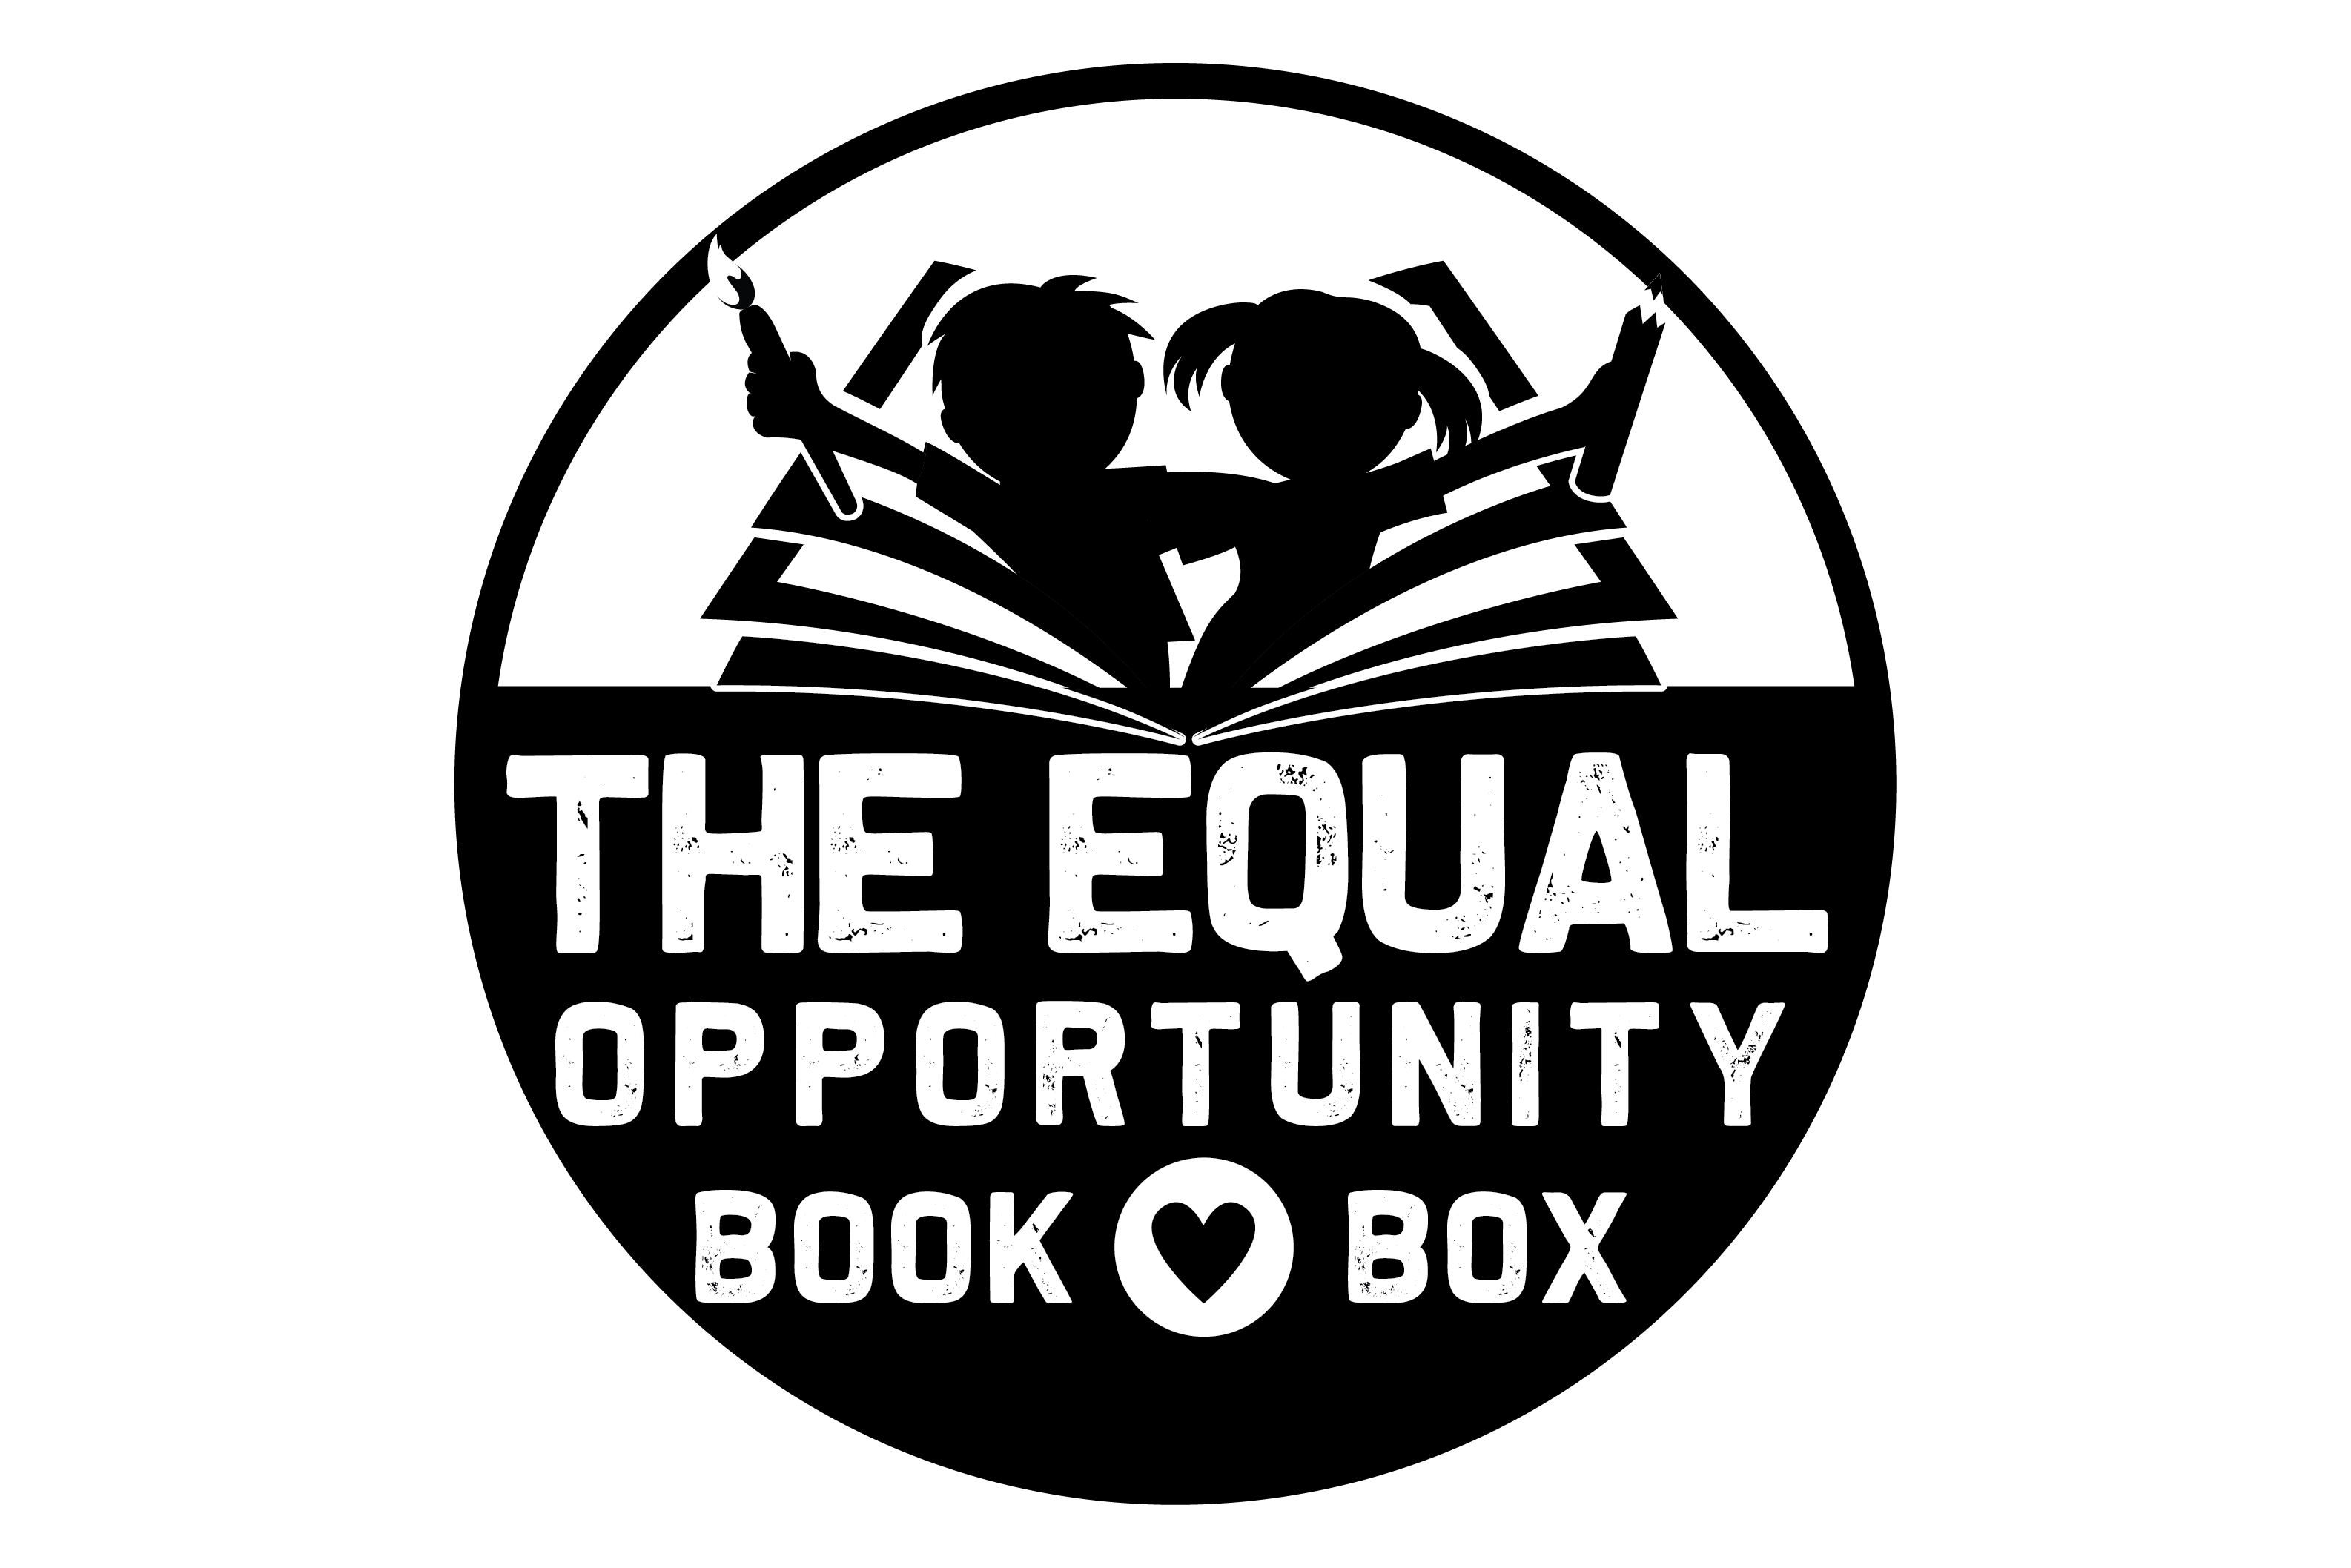 The Equal Opportunity Book Box